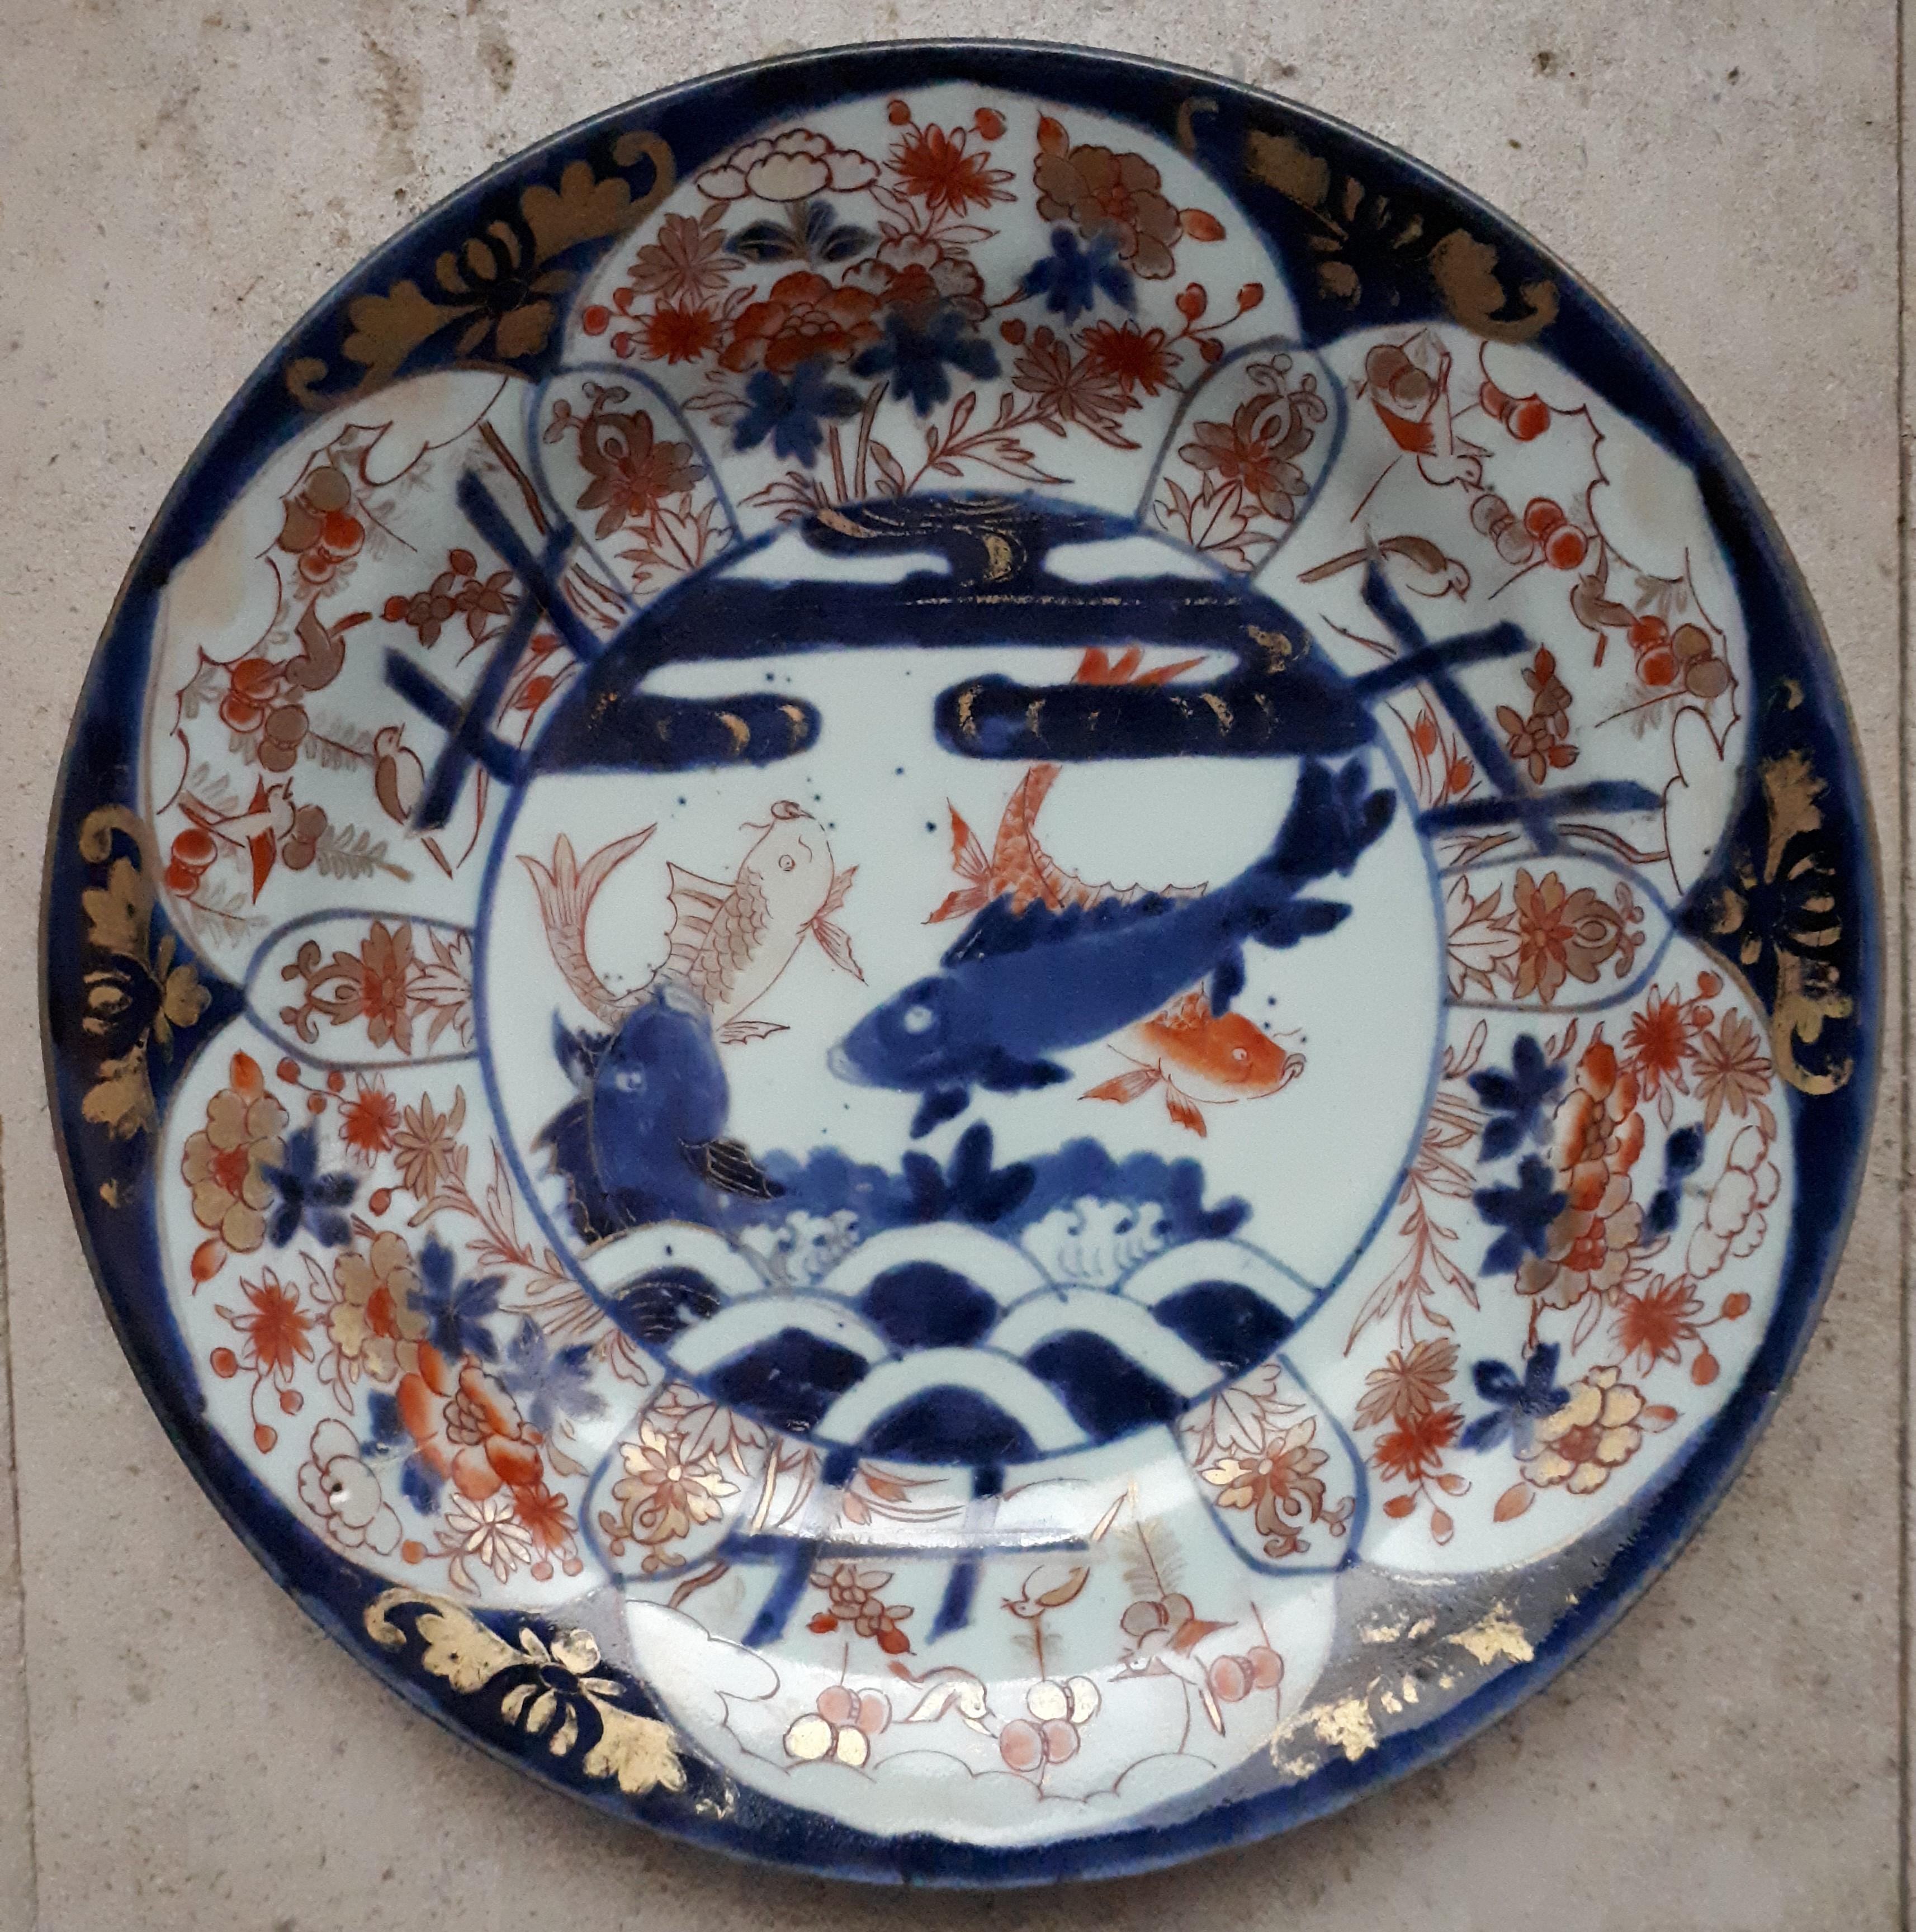 Arita porcelain dish decorated with carps.
Sought-after model, rare in this condition !
Japan, late 17th - early 18th century.